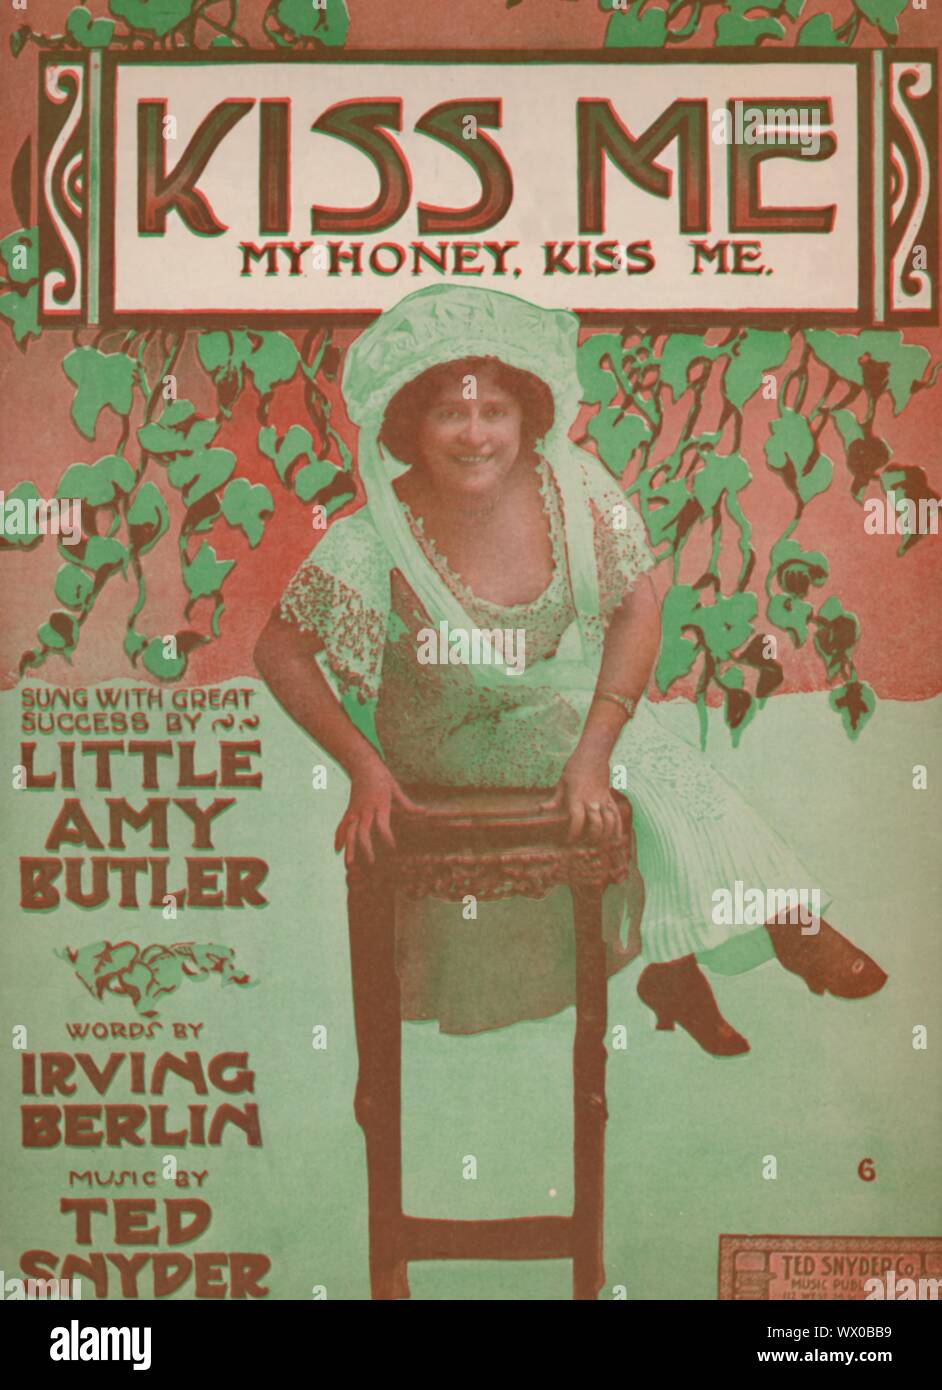 'Kiss Me, My Honey, Kiss Me', 1910. 'Sung with great success by Little Amy Butler'. Cover to sheet music for a song composed by Ted Snyder with lyrics by Irving Berlin. [Ted Snyder Co, New York, 1910] Stock Photo